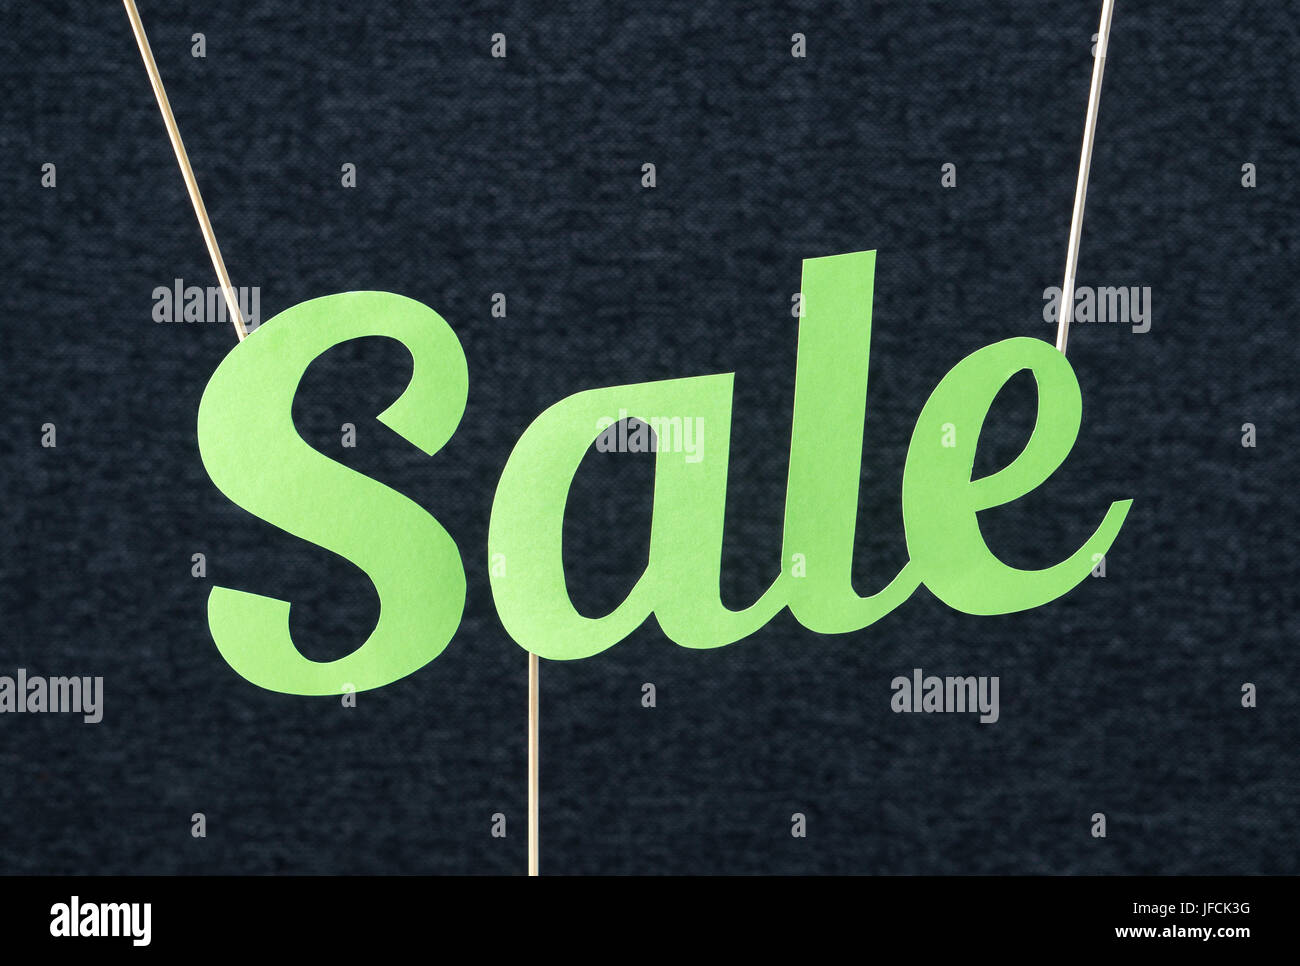 Sale text hanging from ceiling by wooden stick. Vibrant summer design for marketing in website or social media. Green letters cut from cardboard. Stock Photo